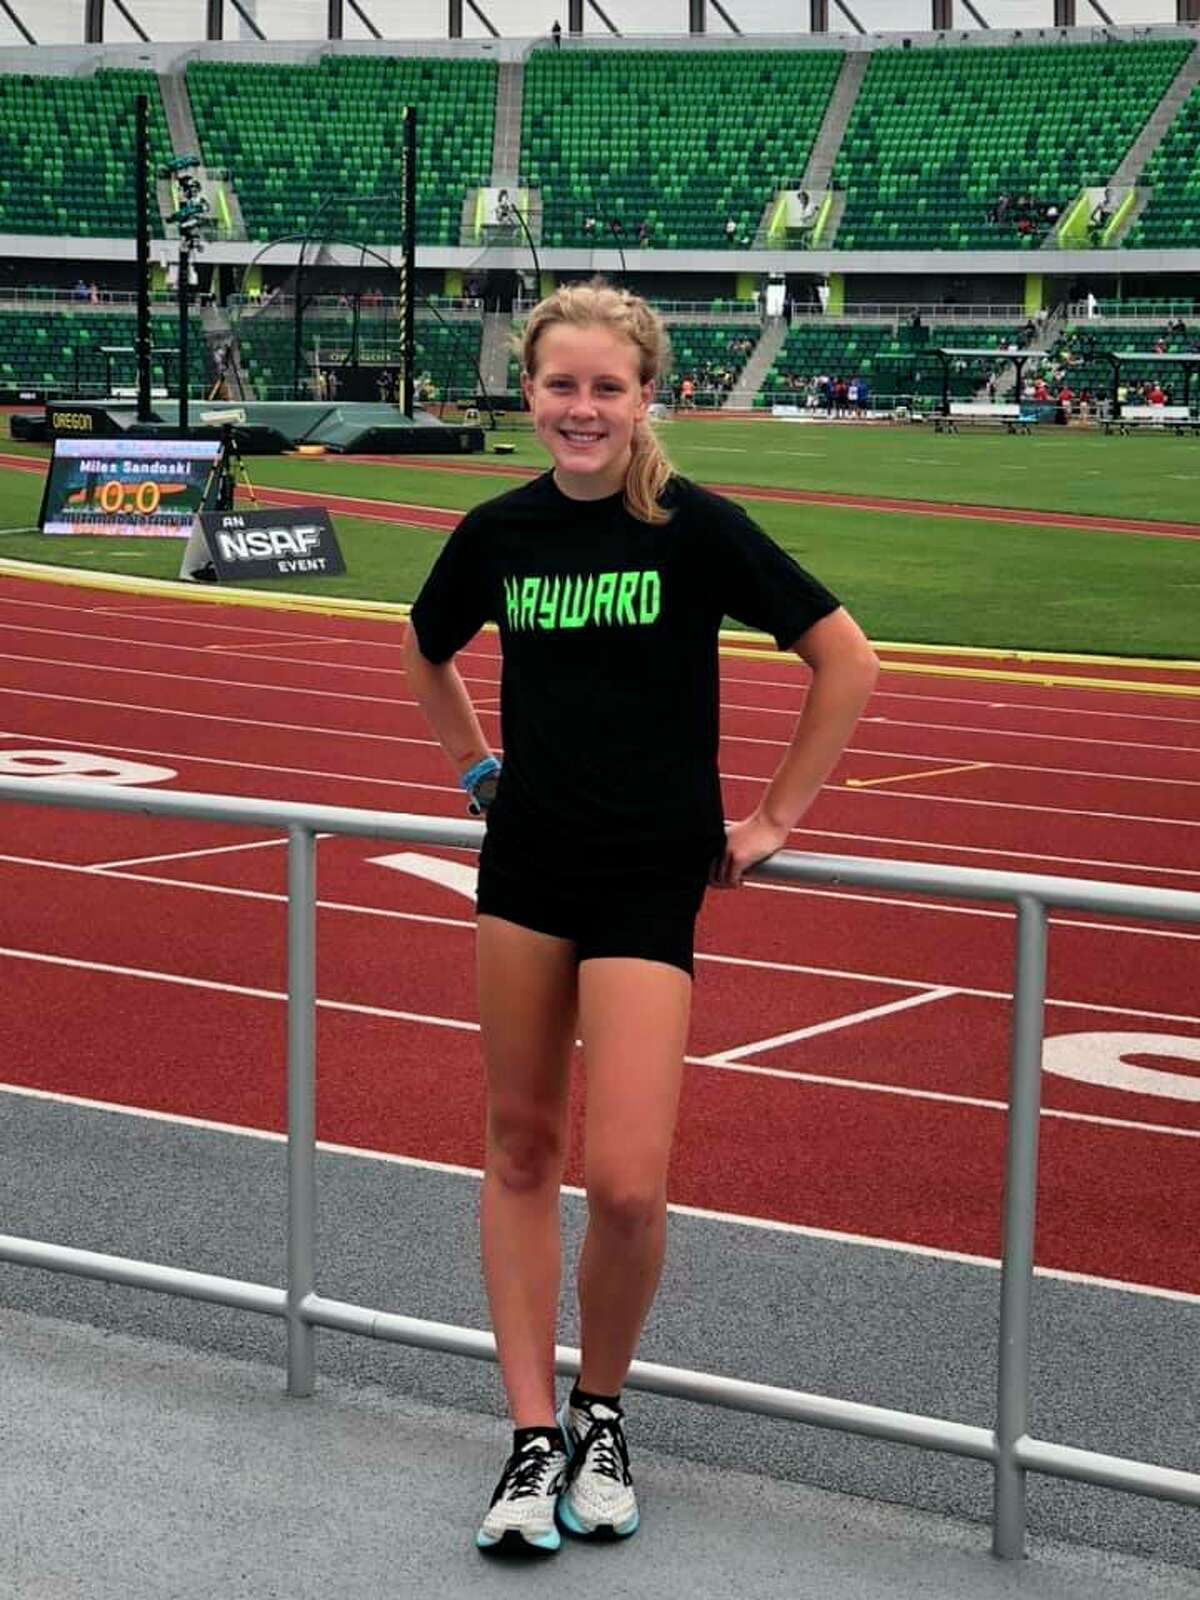 Mylie Kelly poses for a photo while competing at the National Scholastic Athletics Foundation Outdoor Nationals at the famous Hayward Field in Eugene, Ore. on June 30. 